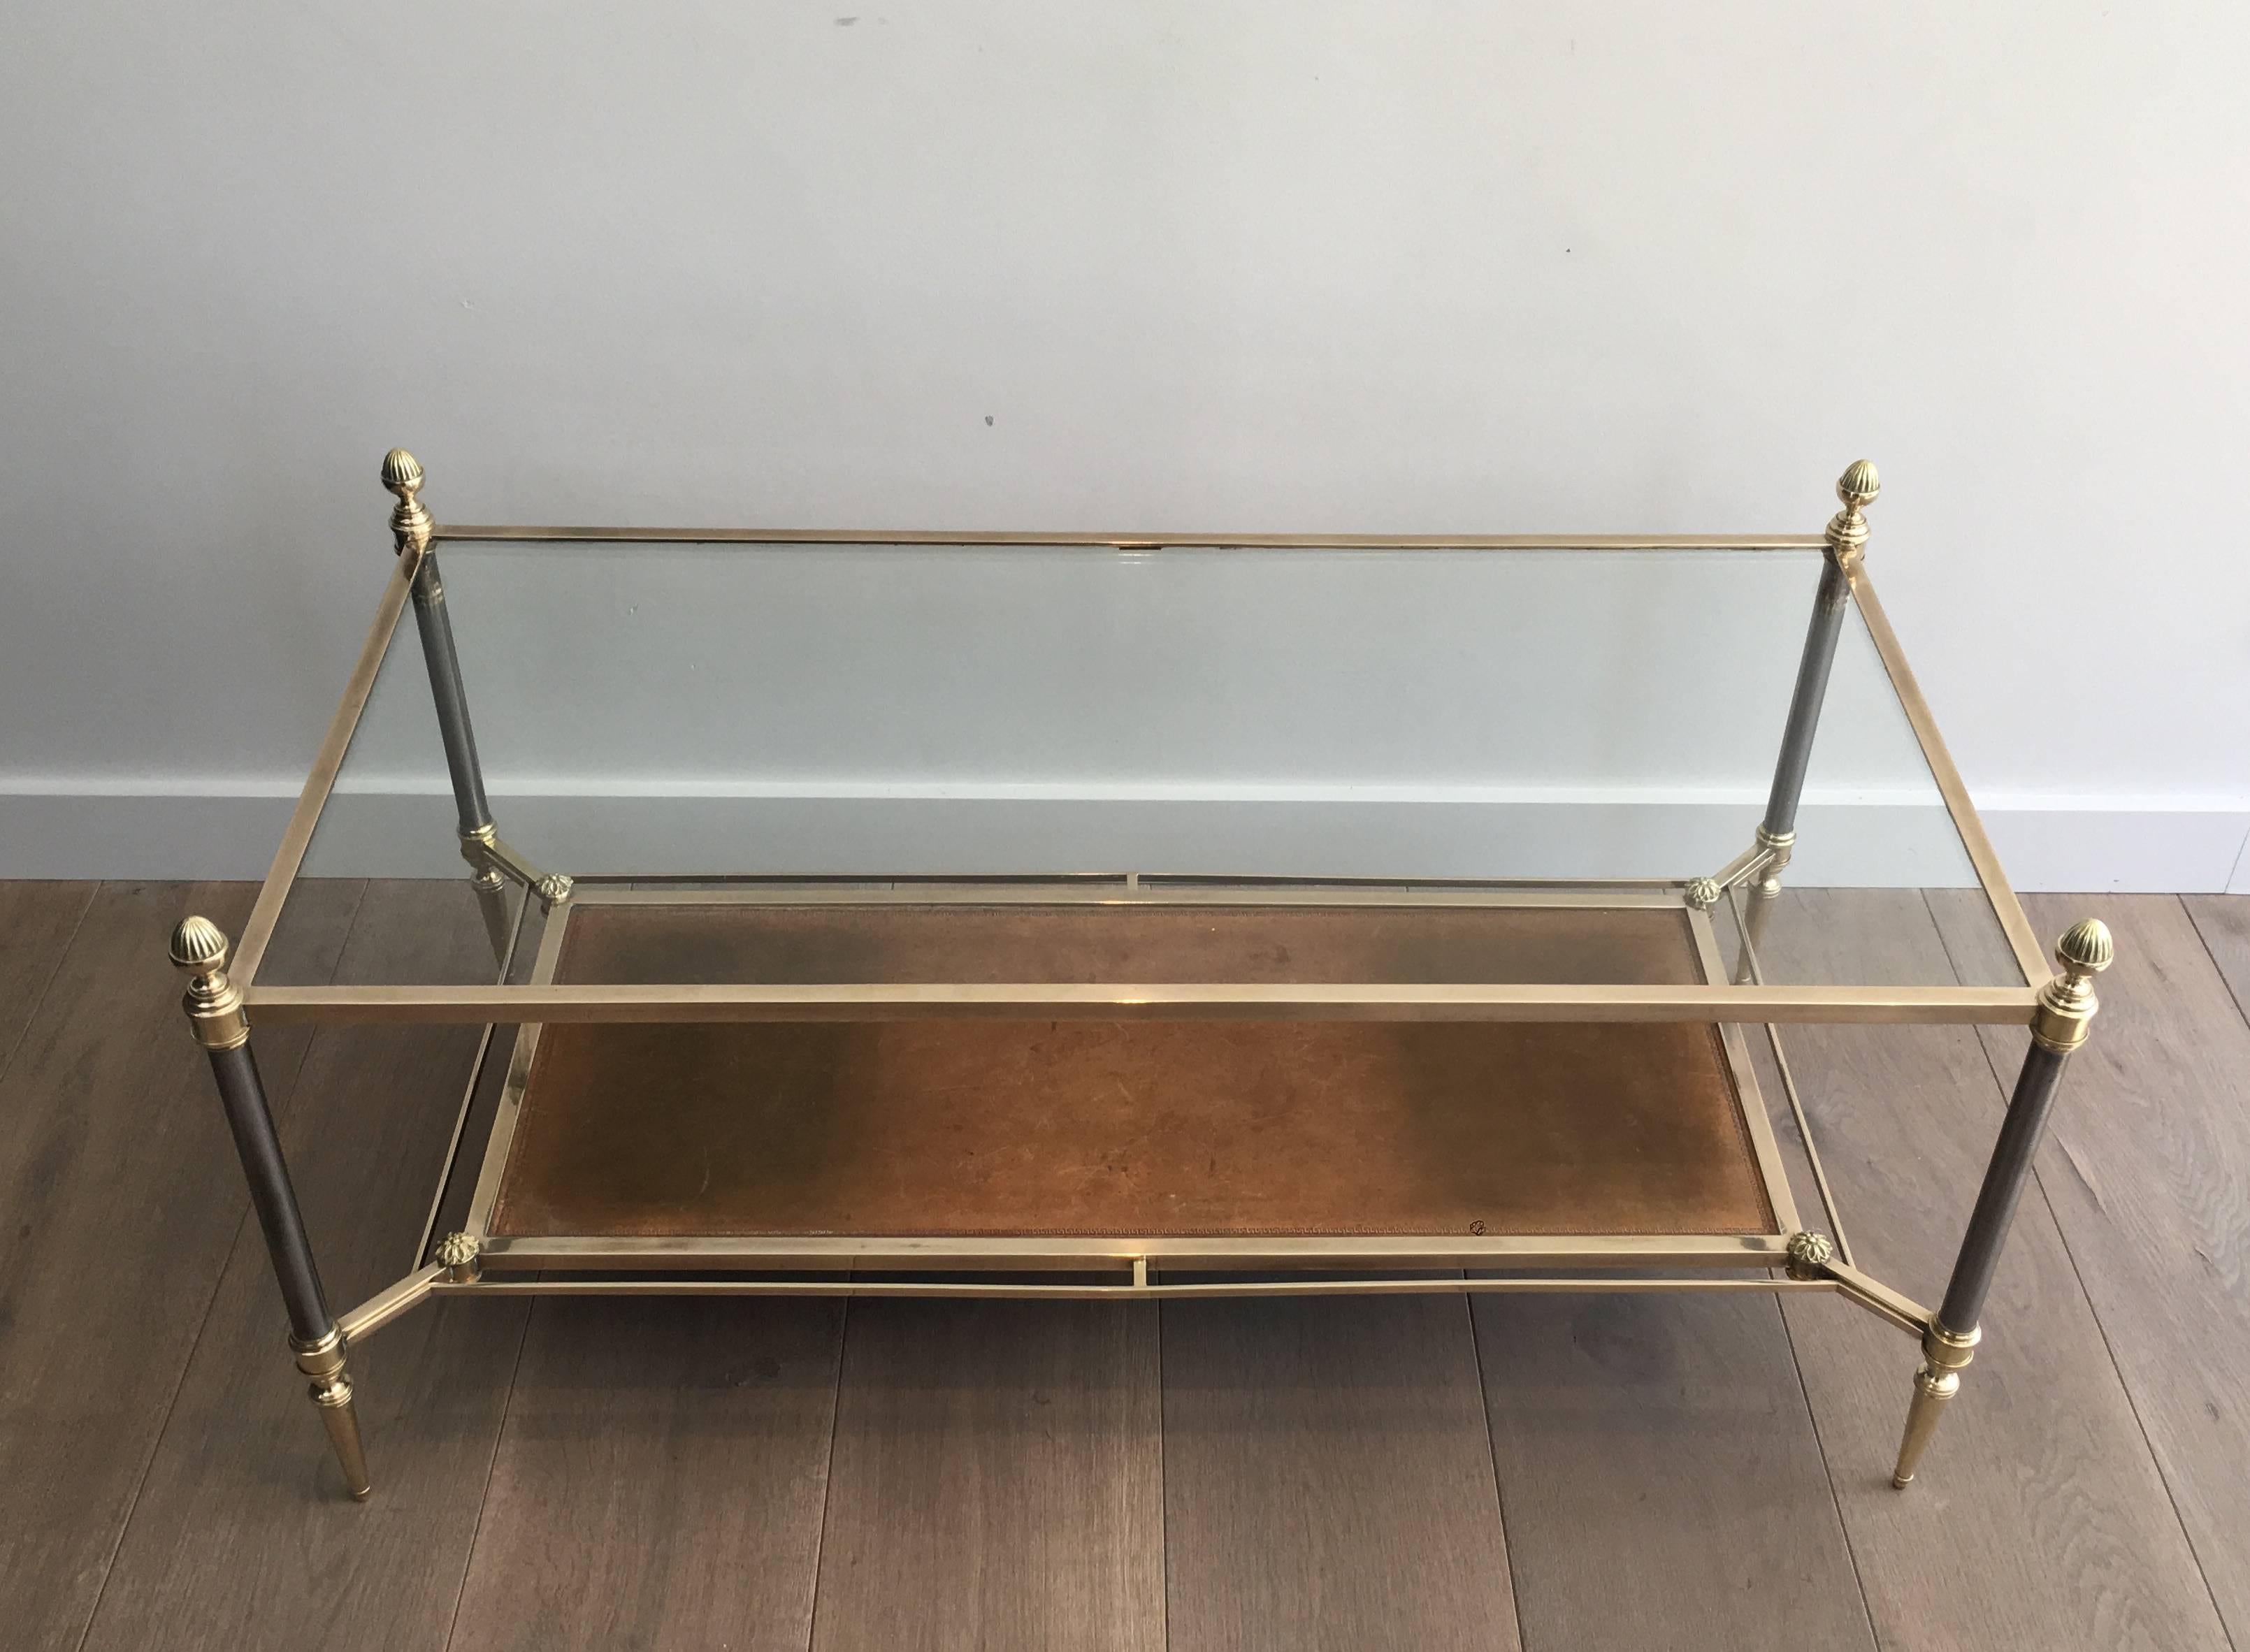 Beautiful neoclassical style brushed steel and brass coffee table with clear glass top shelf and brown leather on the bottom. The vintage leather has variations most likely caused by sun bleaching. The table frame is polished brass with darker